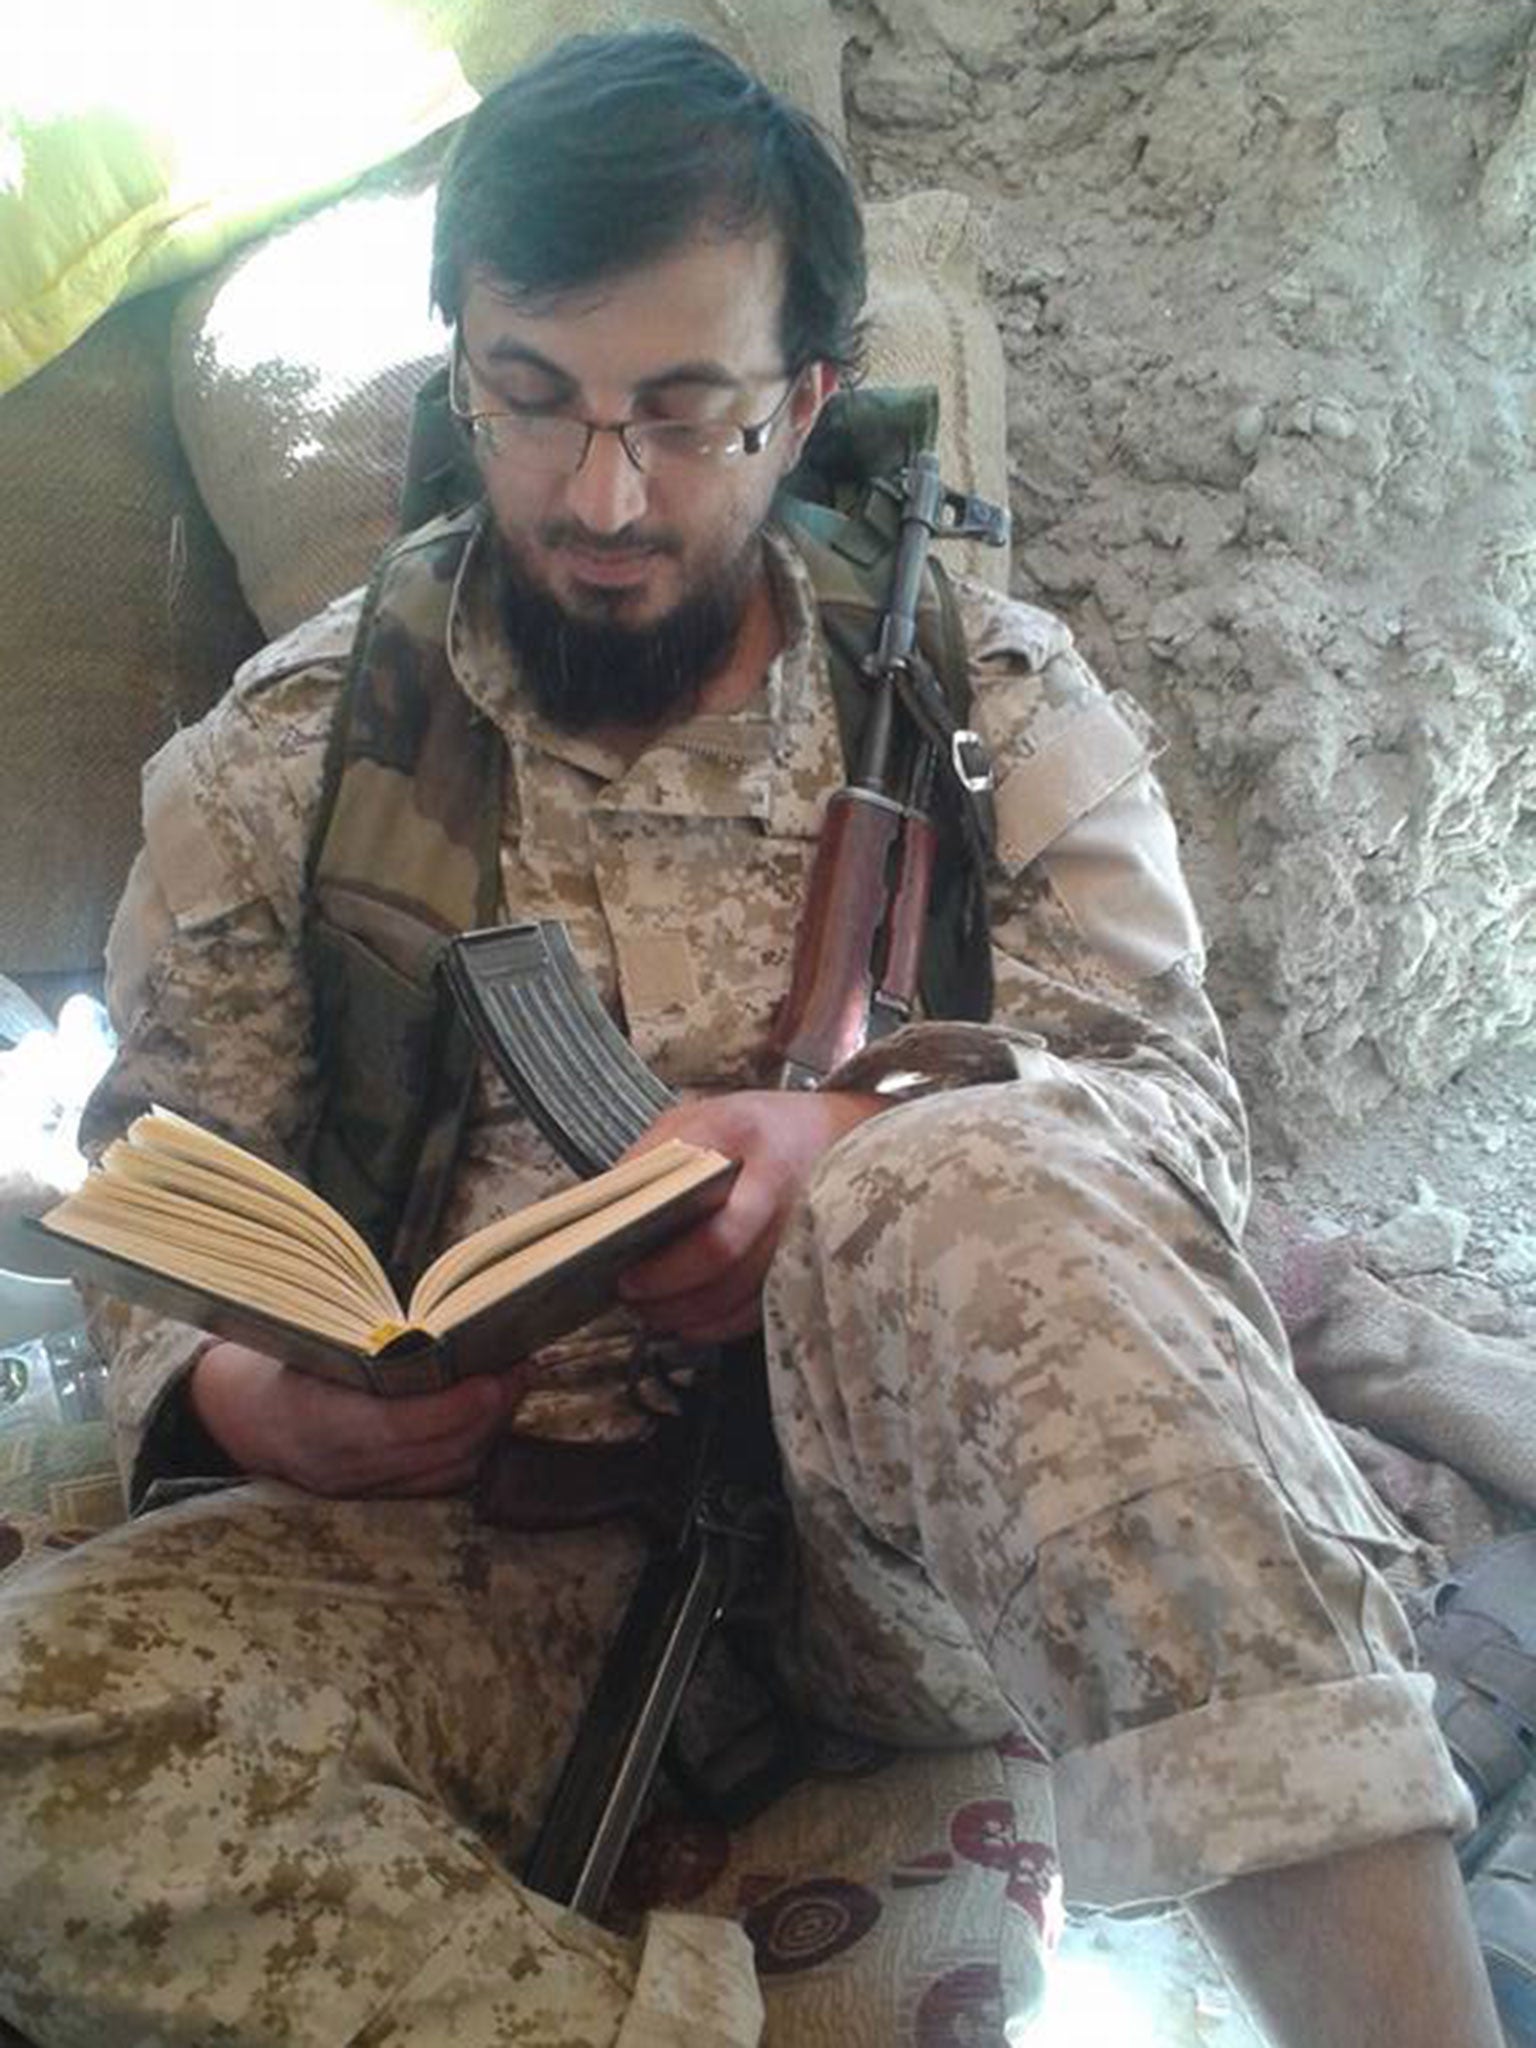 Another image on Issam Abuanza's Facebook page shows him dressed him combat fatigues, reading the Quran with an AK-47 assault rifle resting against his body